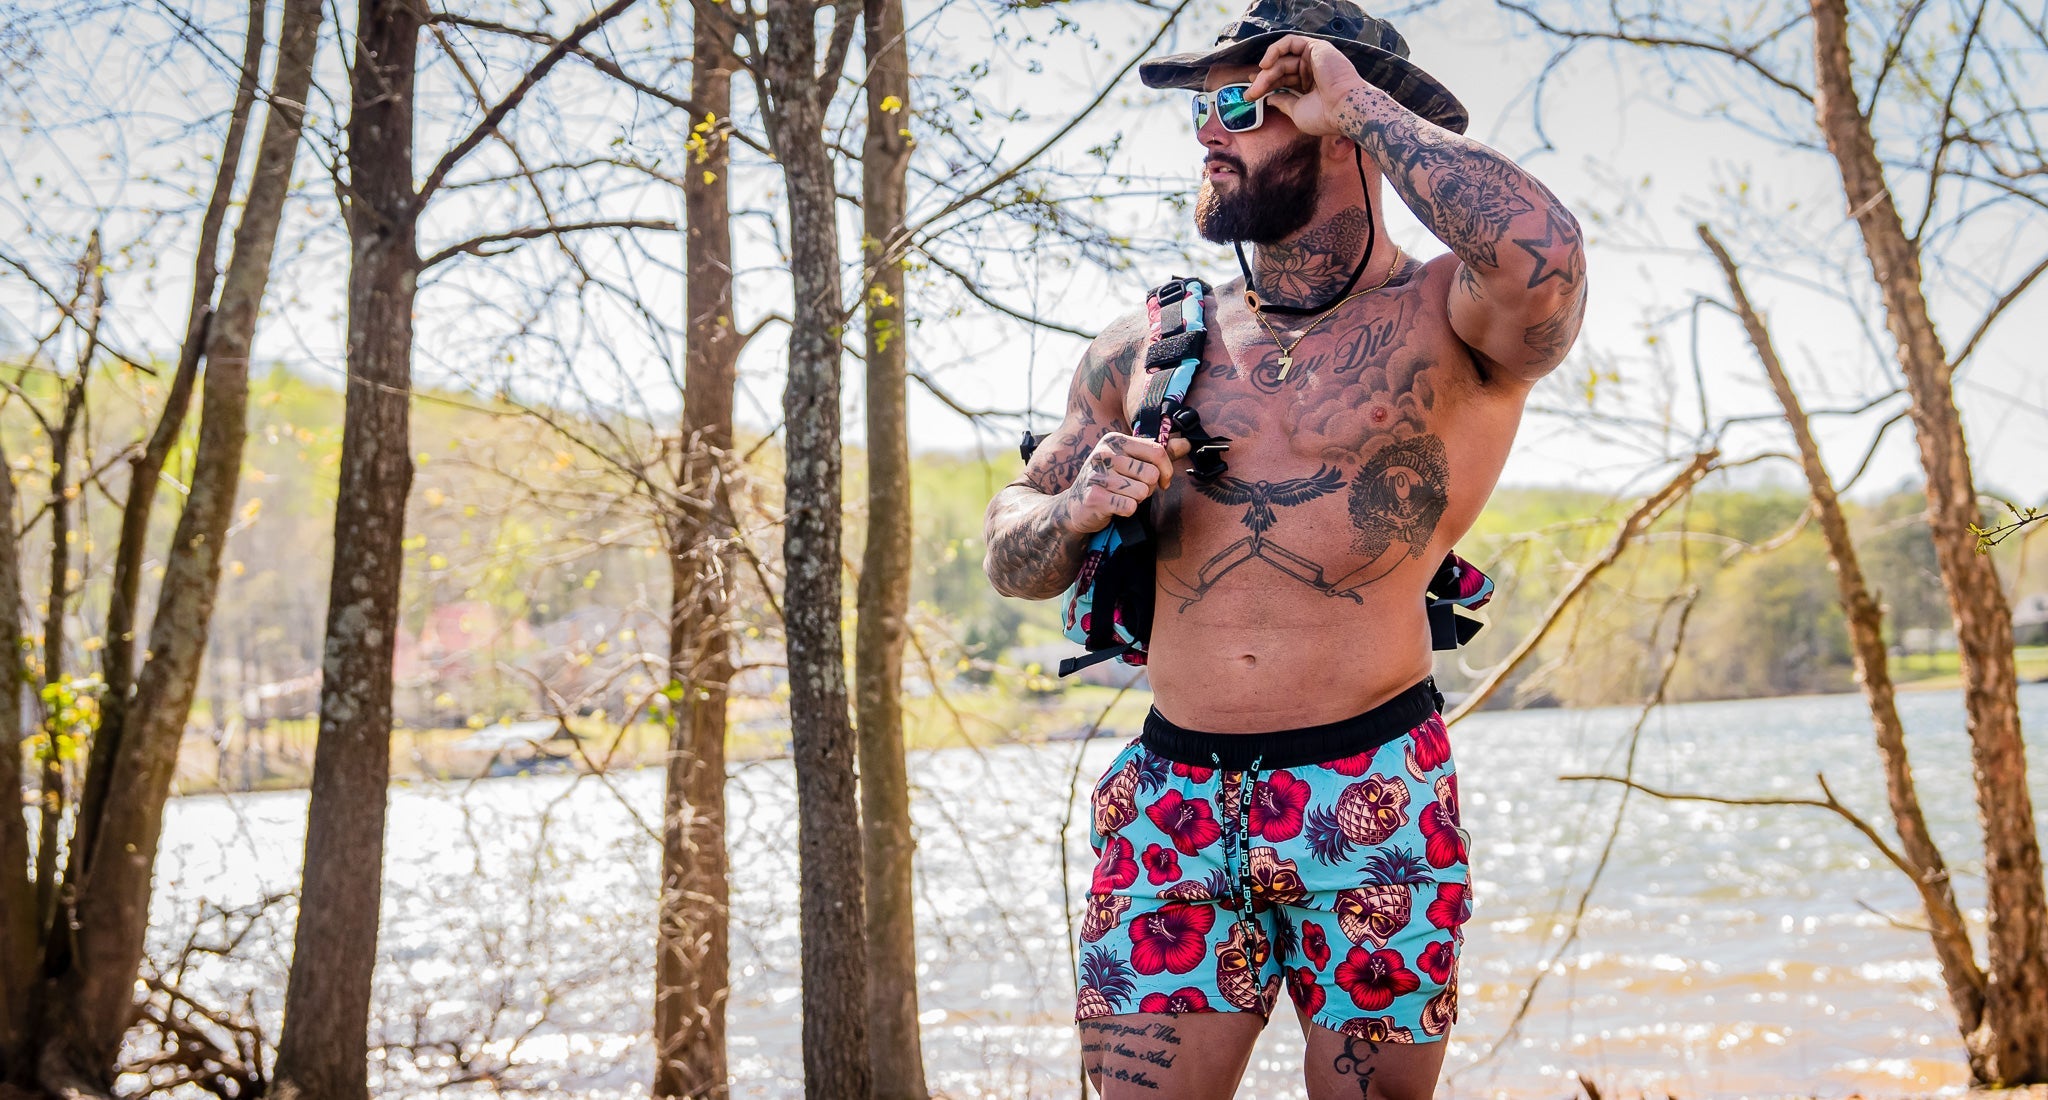 To Liner or Not to Liner? A Proper Guide to Men's Swim Shorts